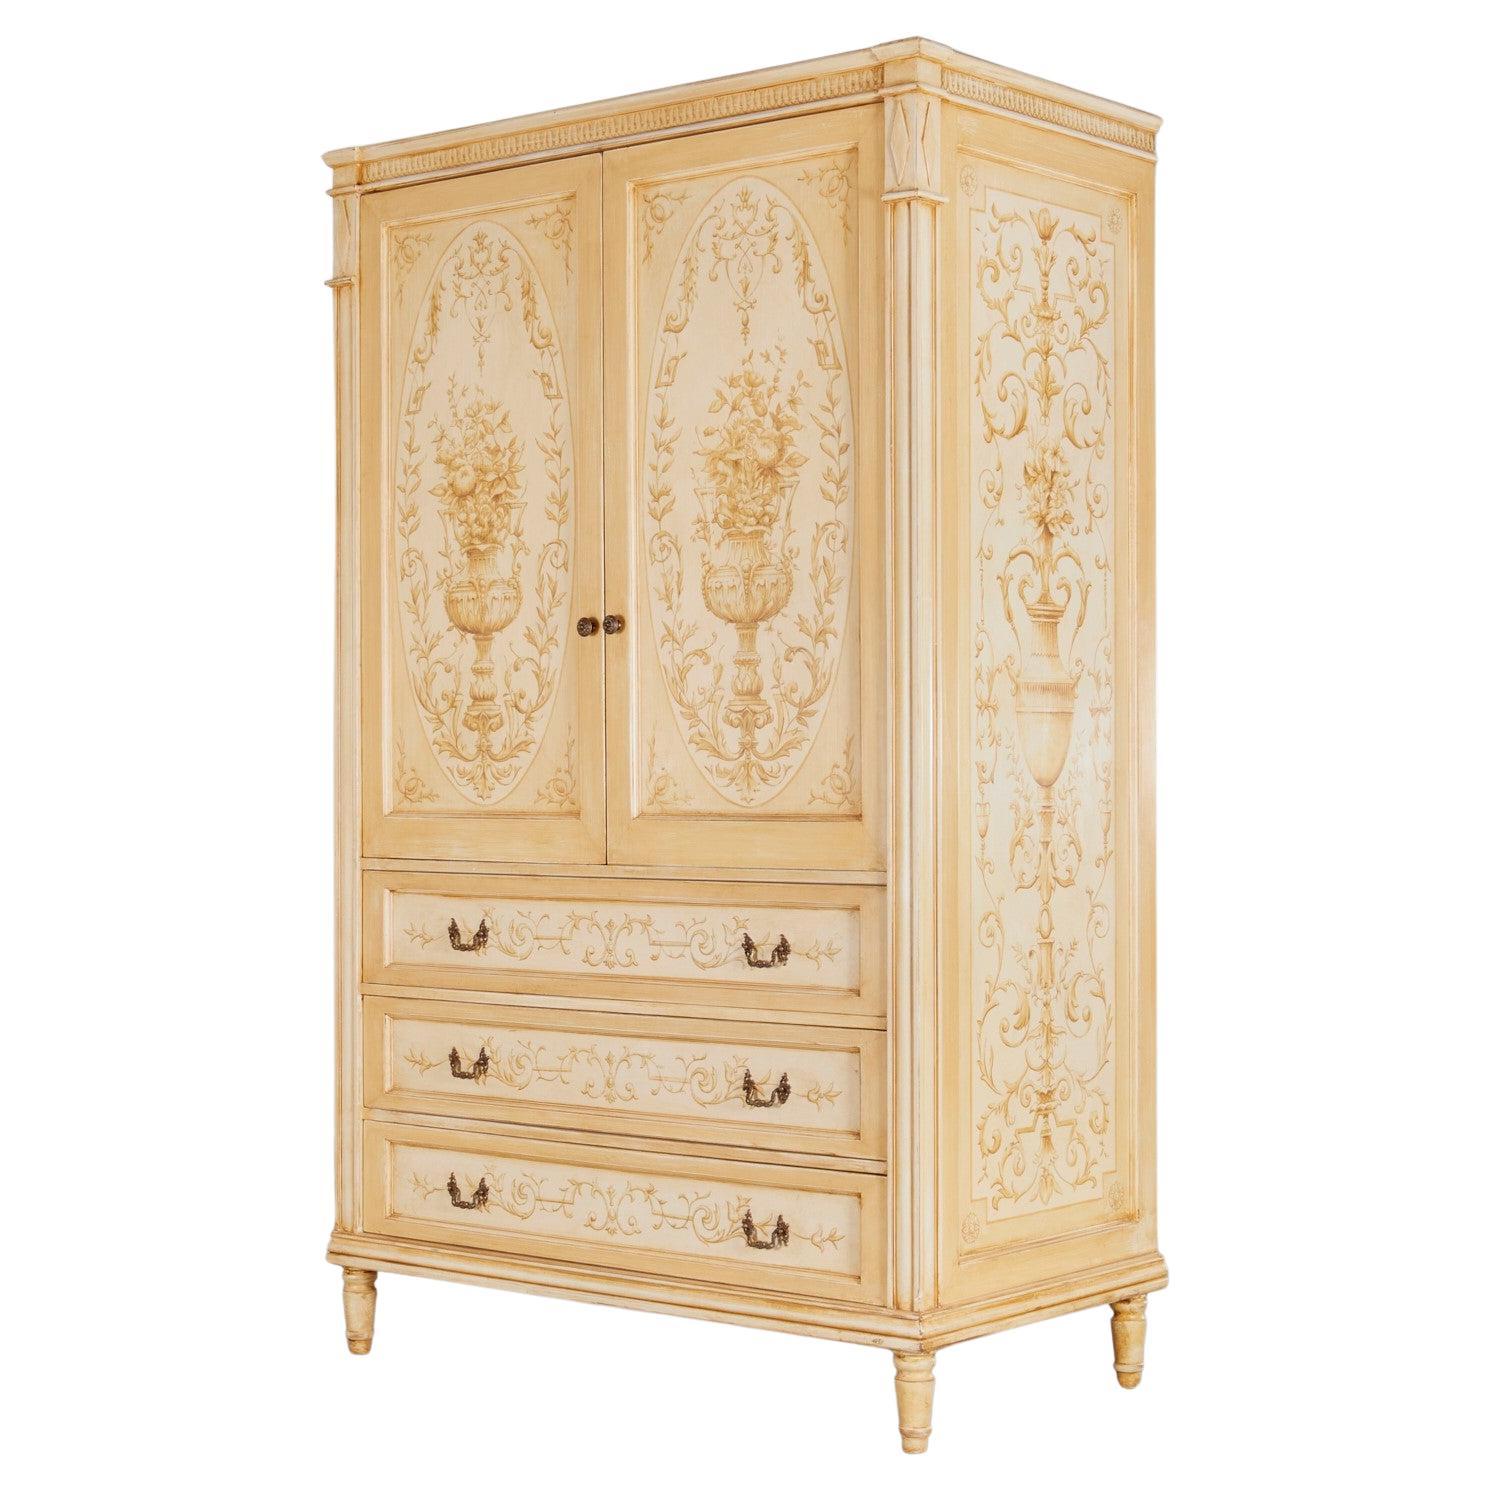 Custom Hand Painted Louis XVI Style Armoire by Ned Marshall Interiors, Inc.